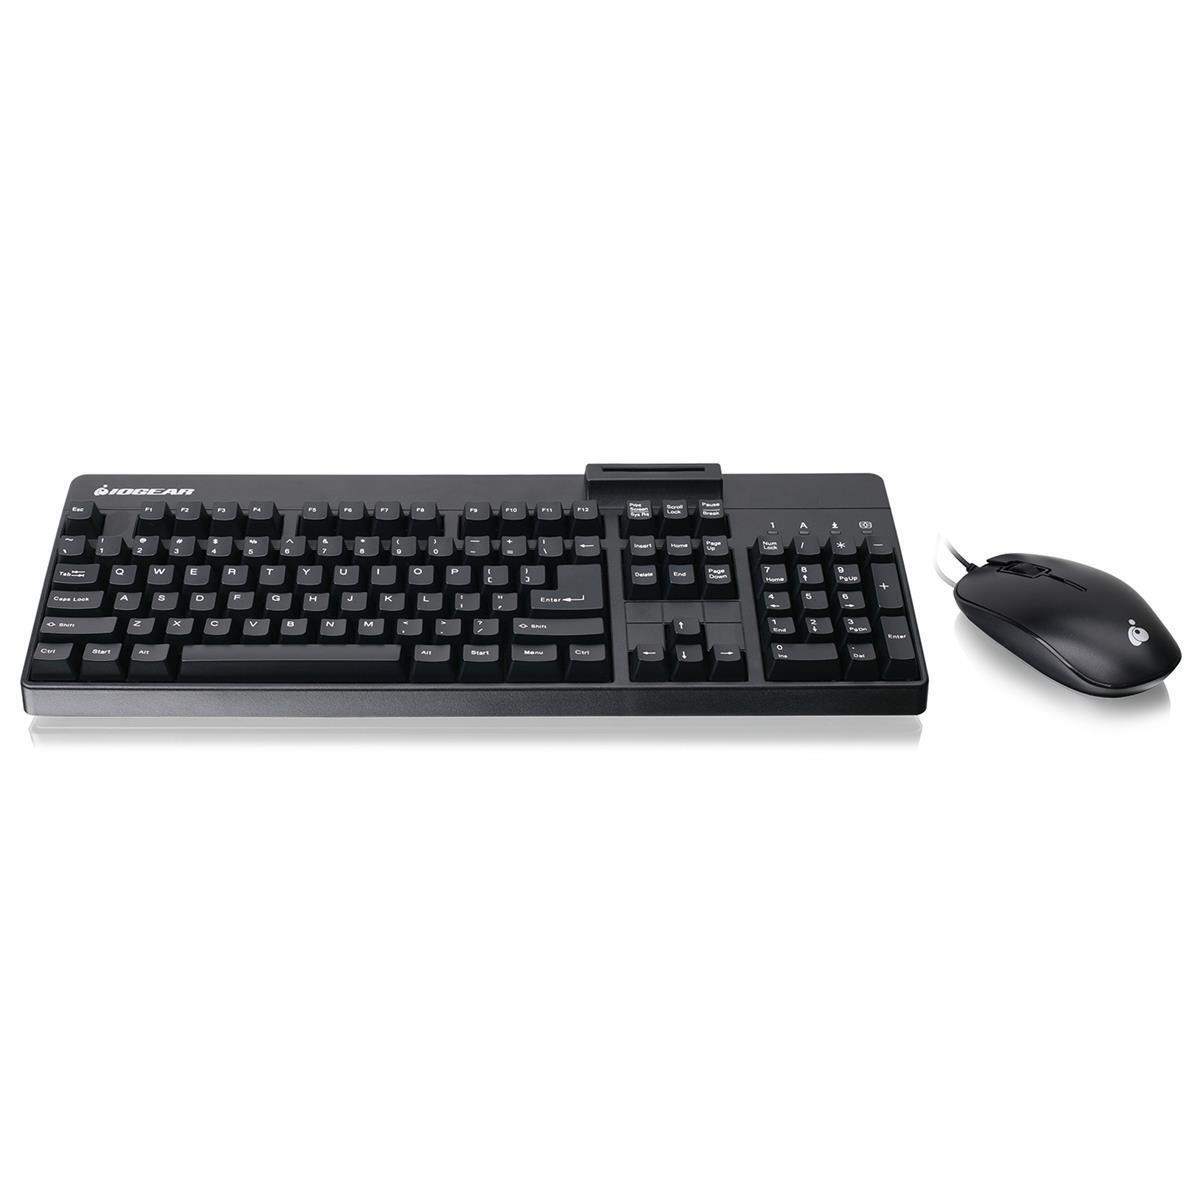 IOGEAR 104-Key Keyboard with Built-In Common Access Card Reader  3-Button Mouse